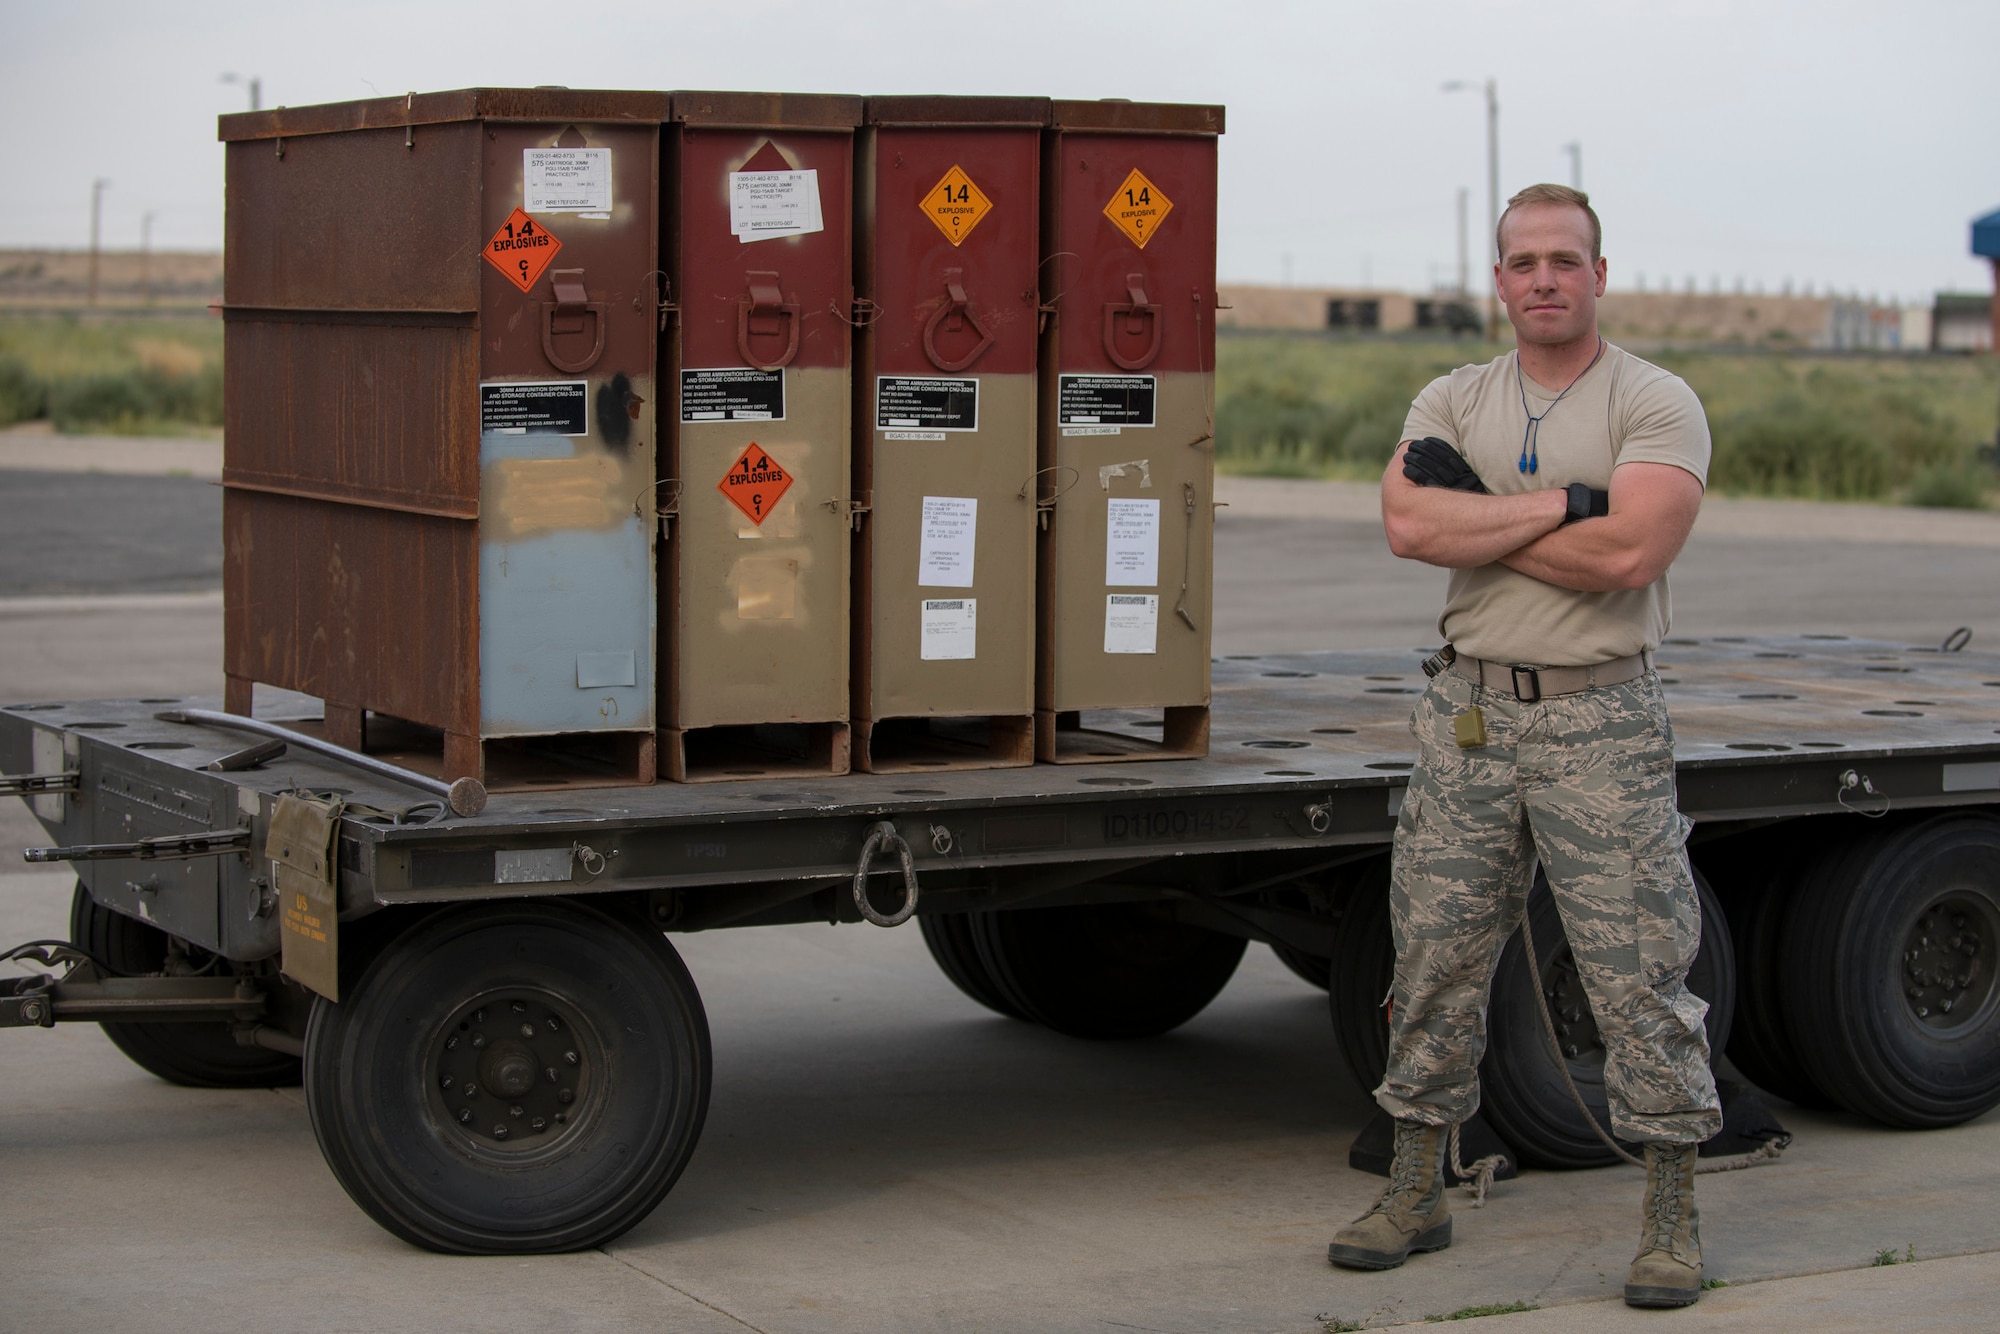 Airman 1st Class Isaac M. Campbell, a munitions systems apprentice from the 124th Maintenance Squadron, 124th Fighter Wing, stands next to boxes of 30 mm ammunition at Gowen Field, Idaho, Aug. 17, 2018.